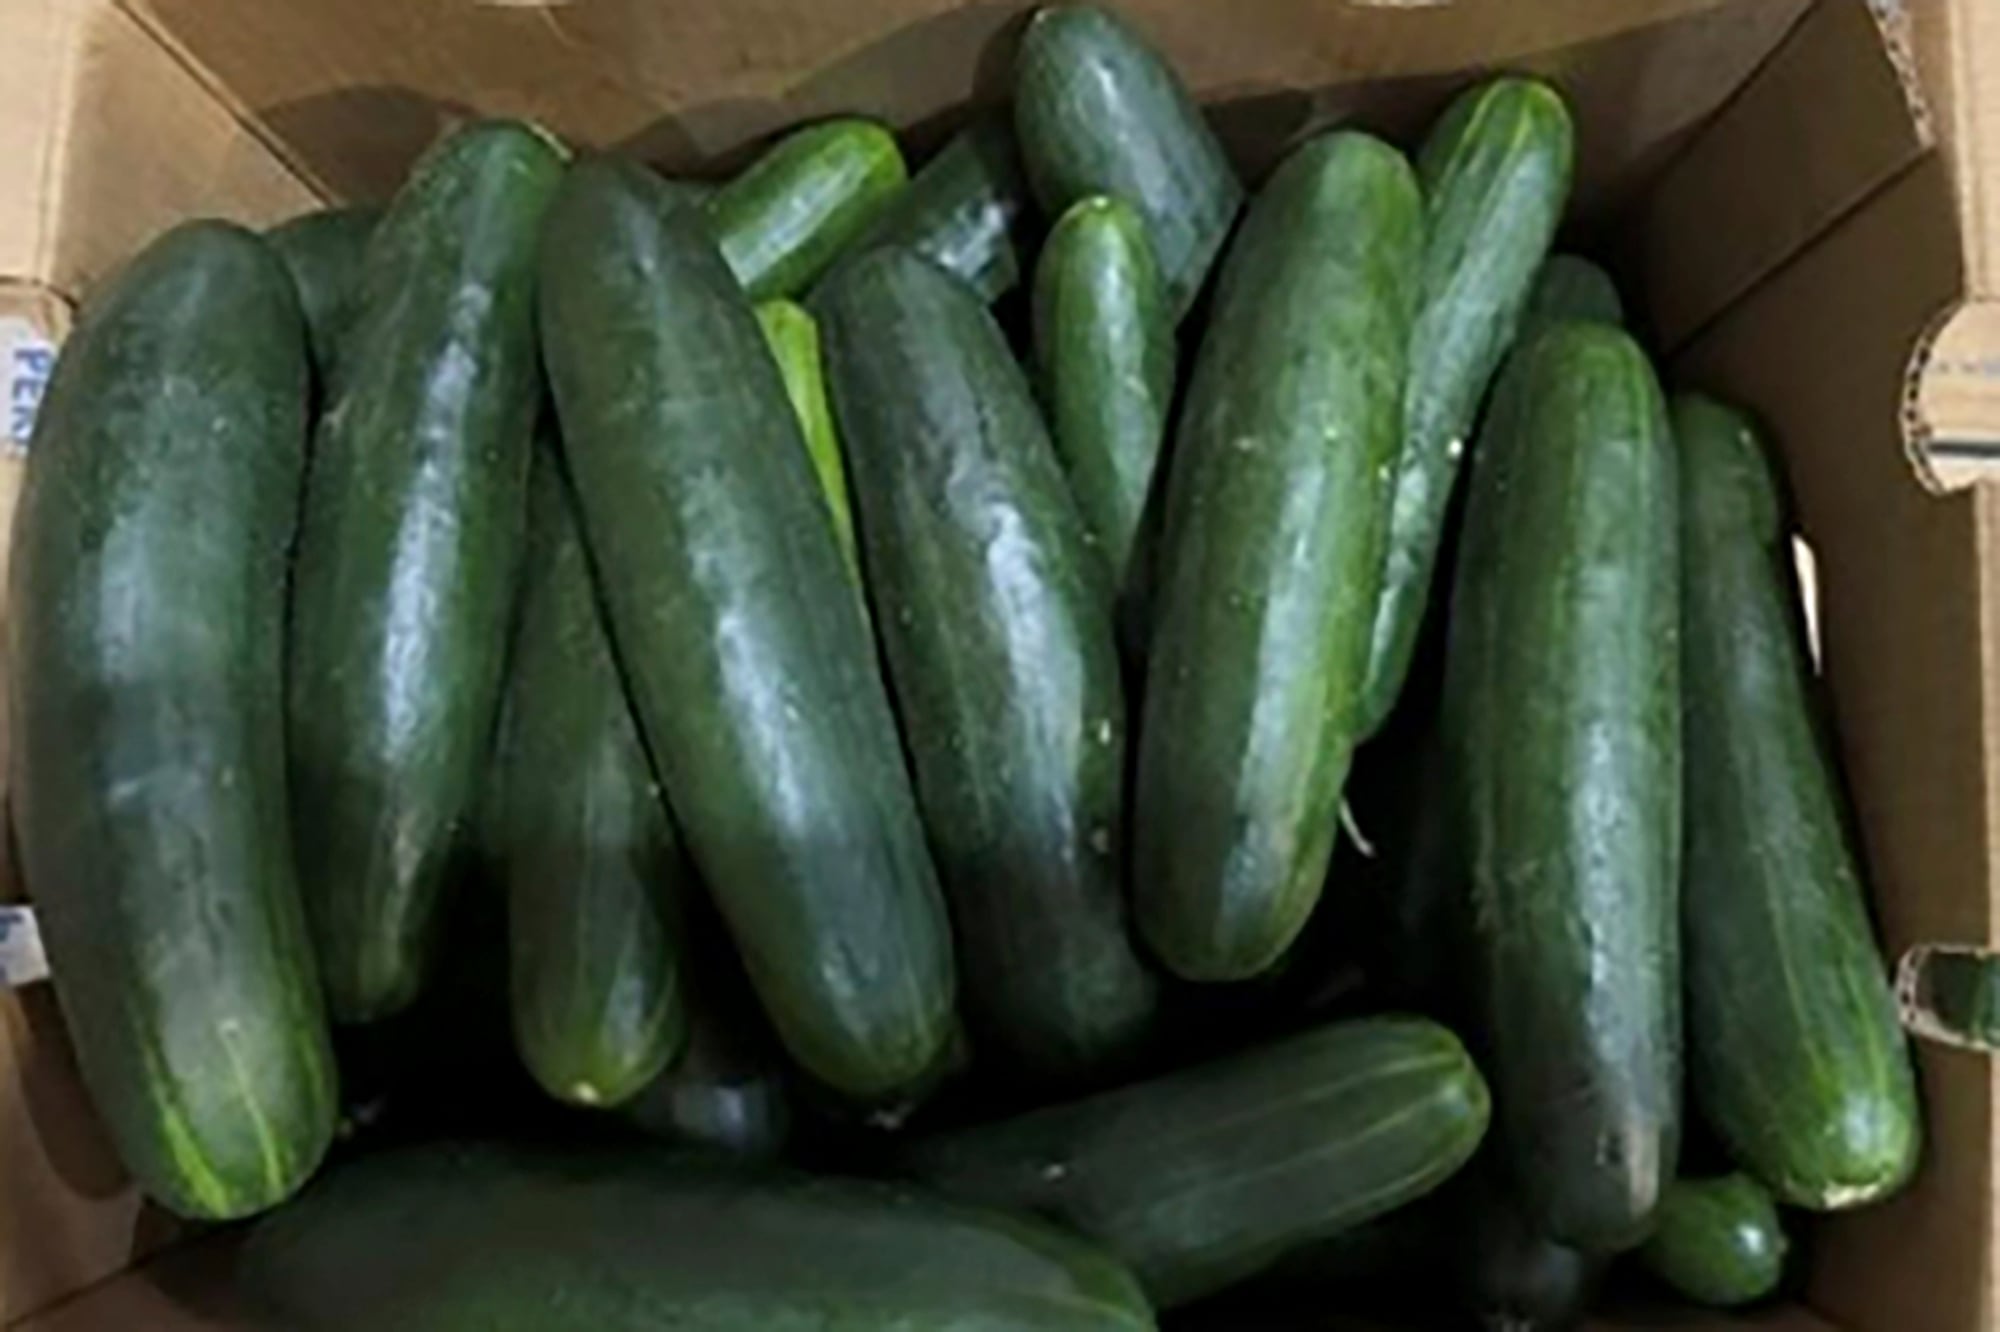 Untreated water tied to salmonella outbreak in cucumbers that sickened 450 people in U.S.